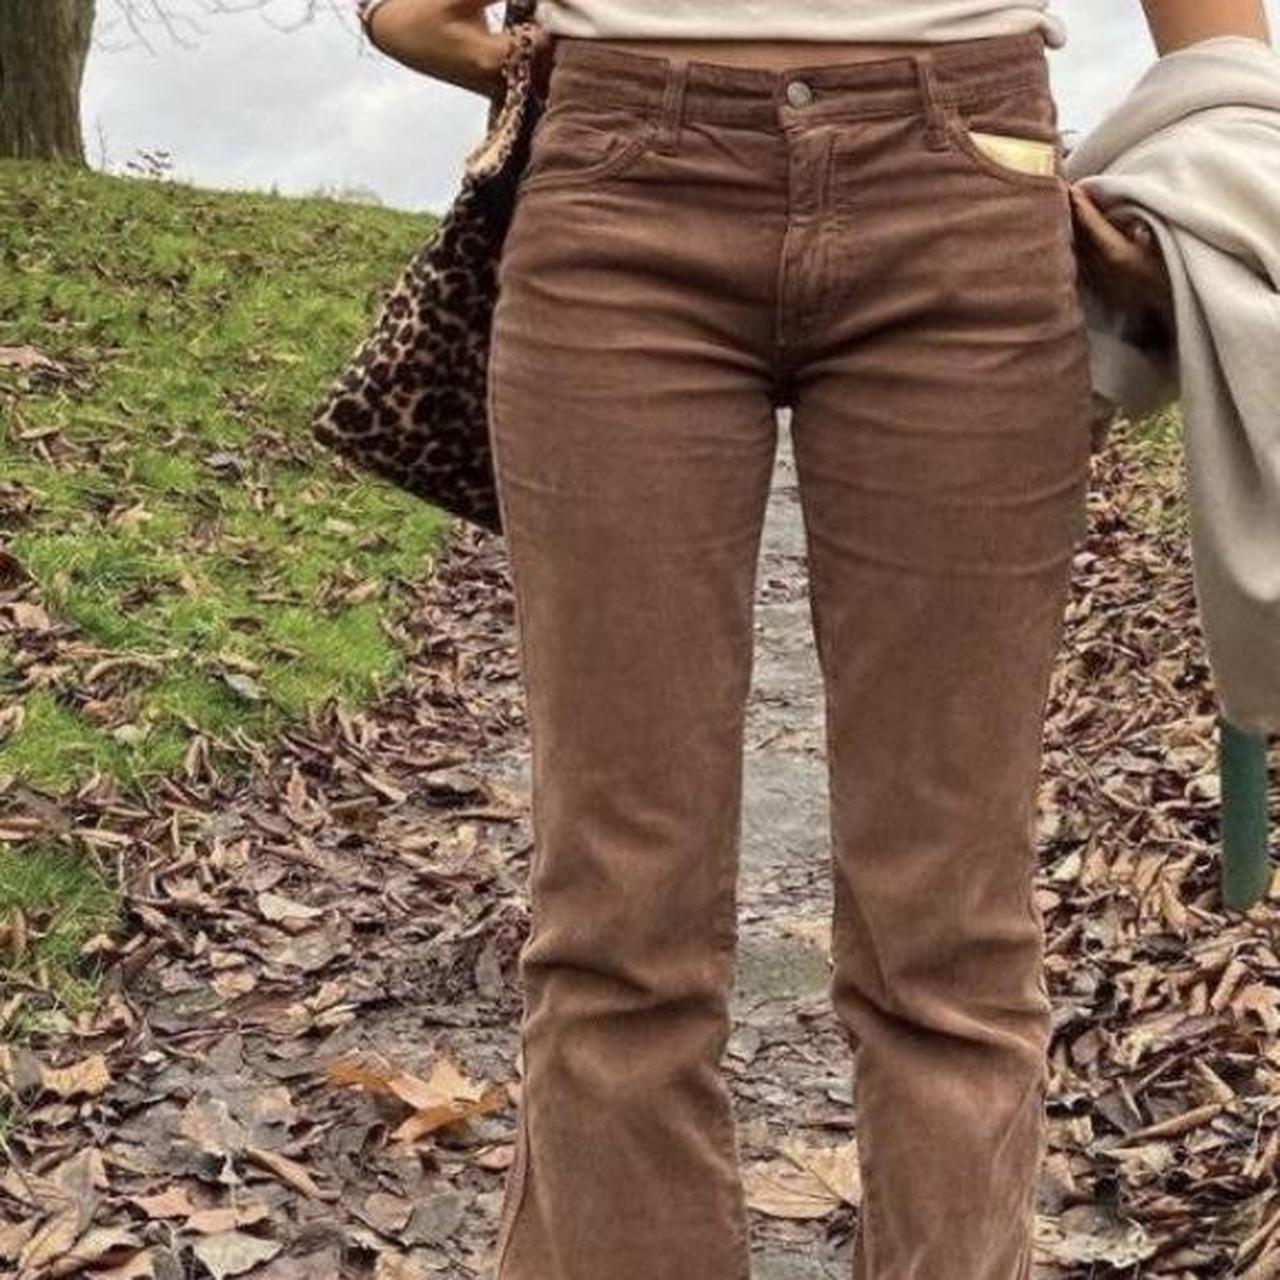 Brandy Melville Brown Corduroy Flare Pants Size 24 - $22 - From J